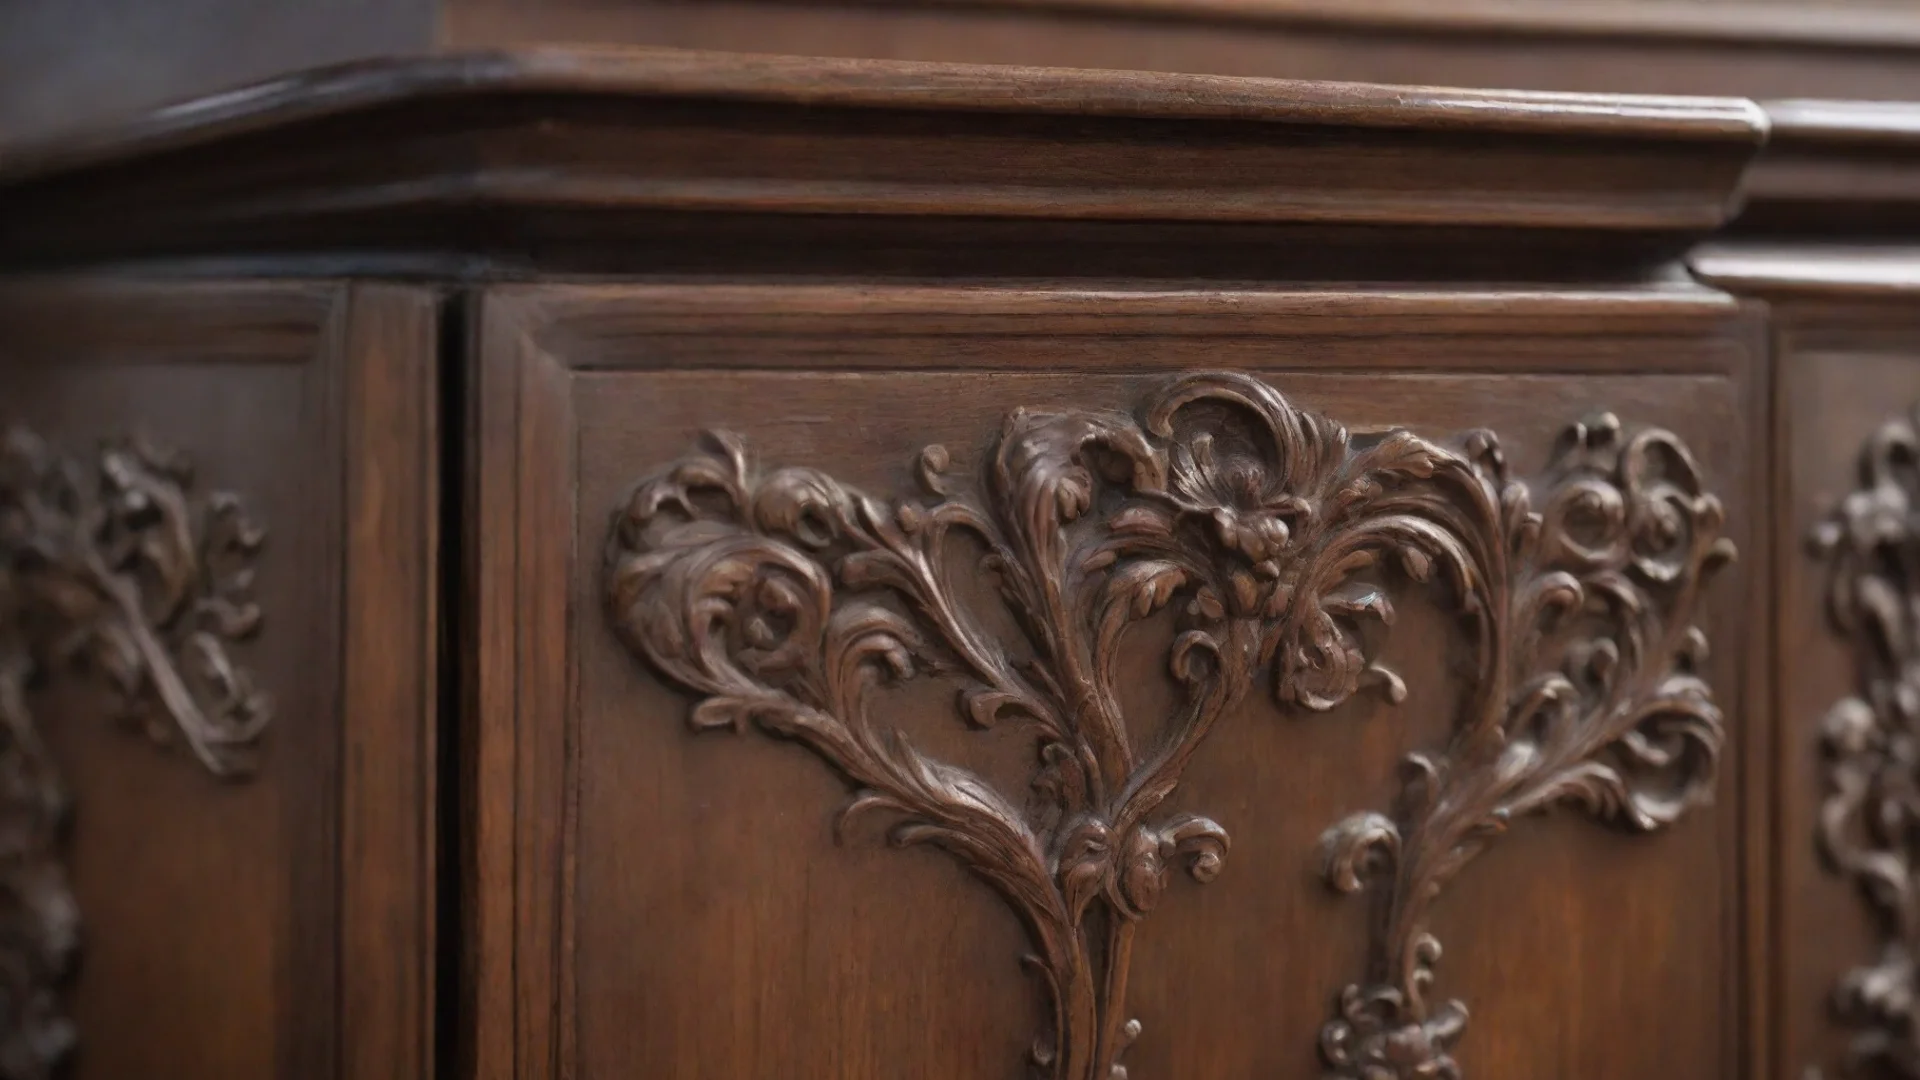 aiamazing detail view of an ornate wooden cabinet dark brown at the edge blurred with high craftsmanship awesome portrait 2 hdwidescreen